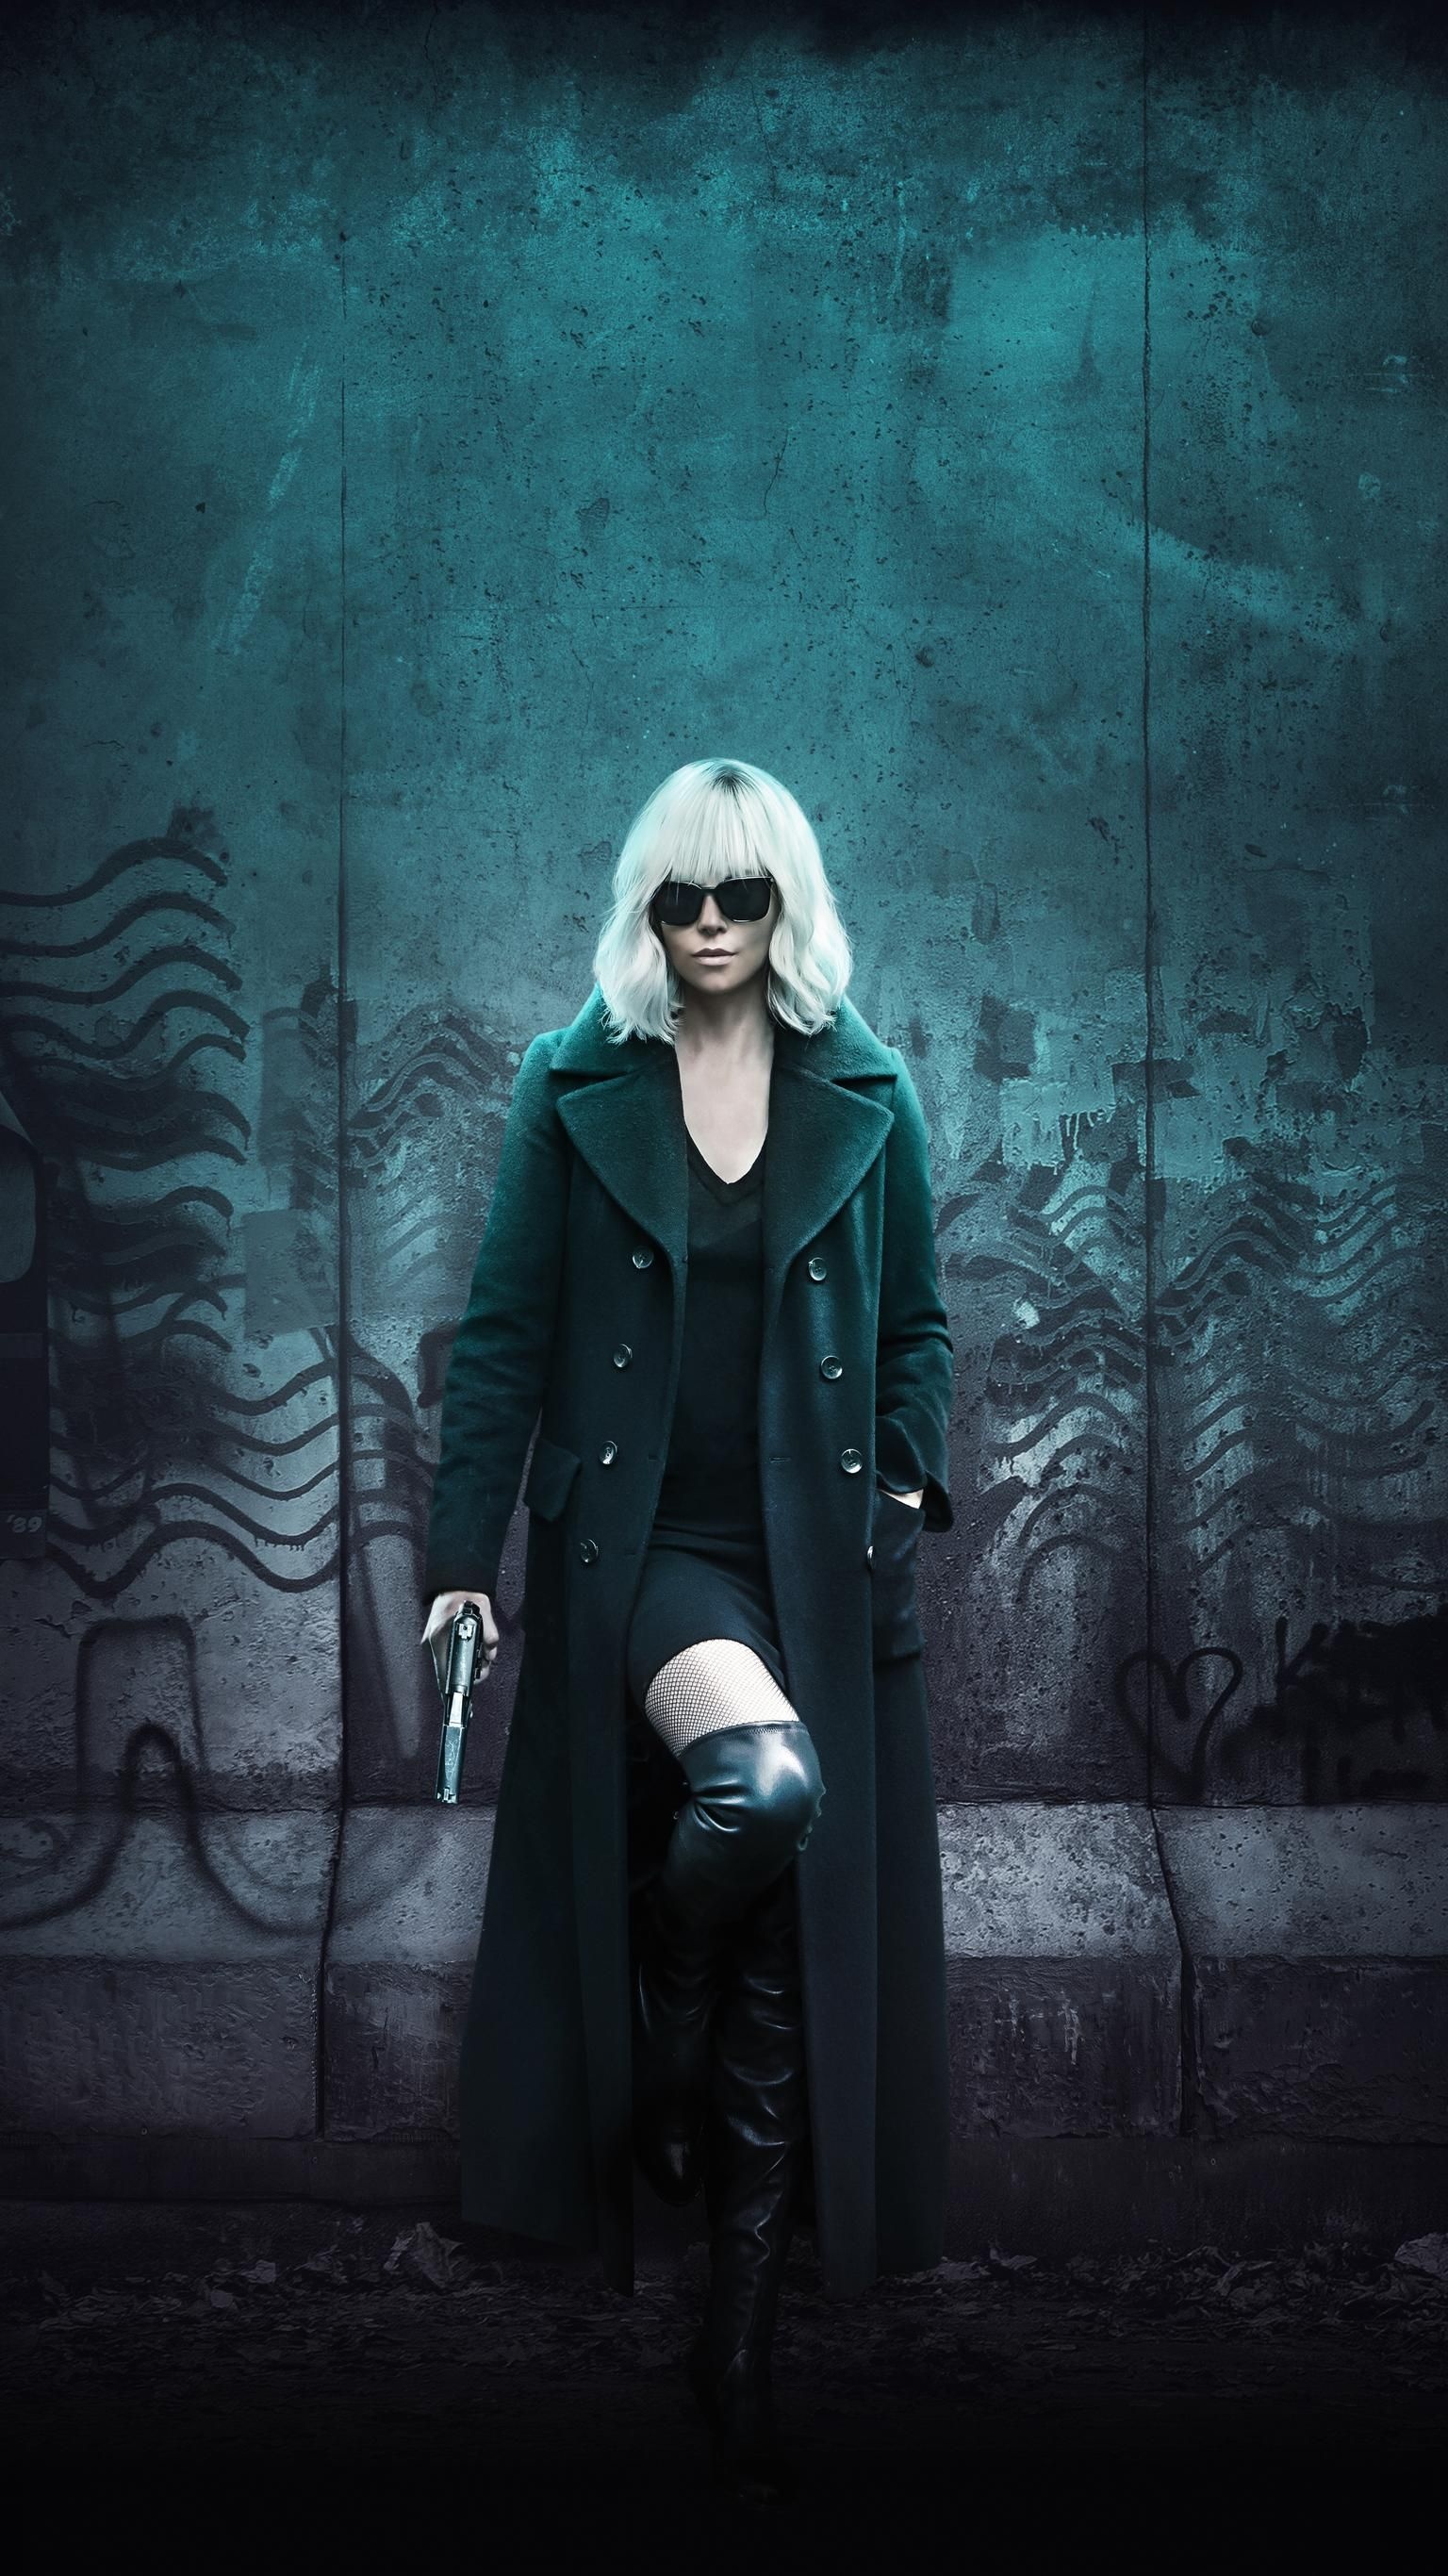 Charlize Theron: The role in Atomic Blonde, Co-producer. 1540x2740 HD Wallpaper.